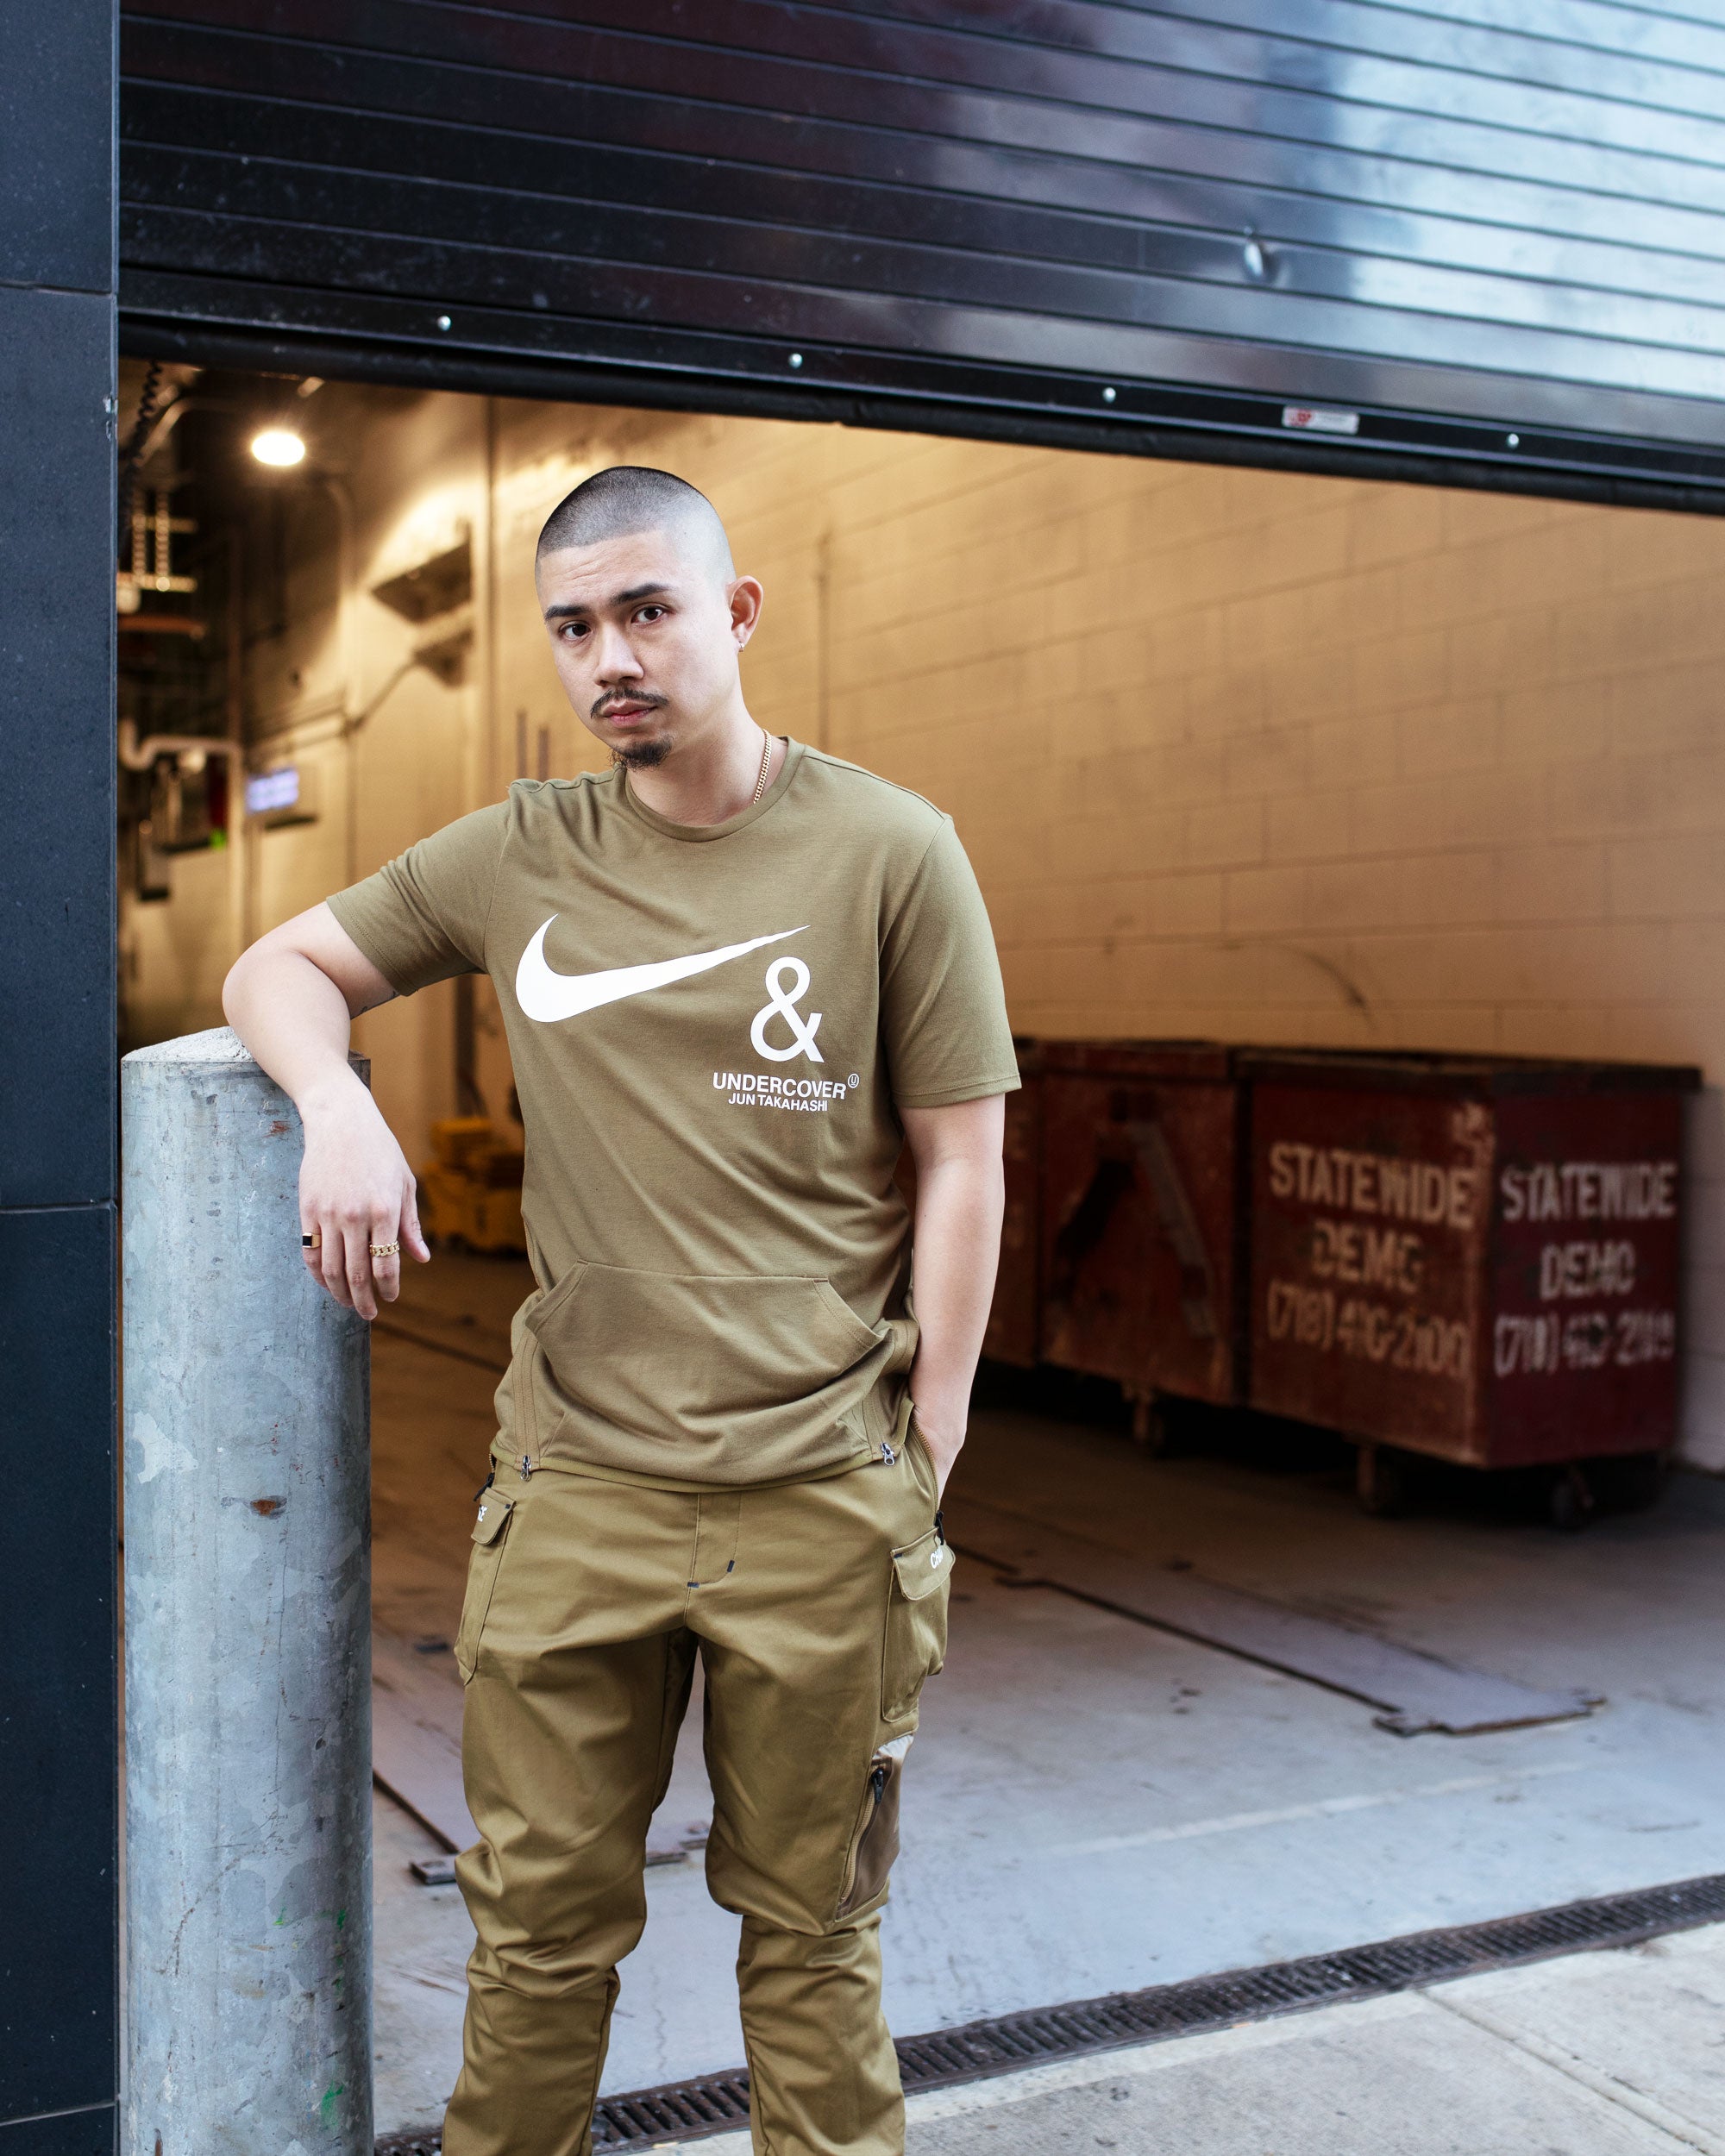 undercover nike cargo pants